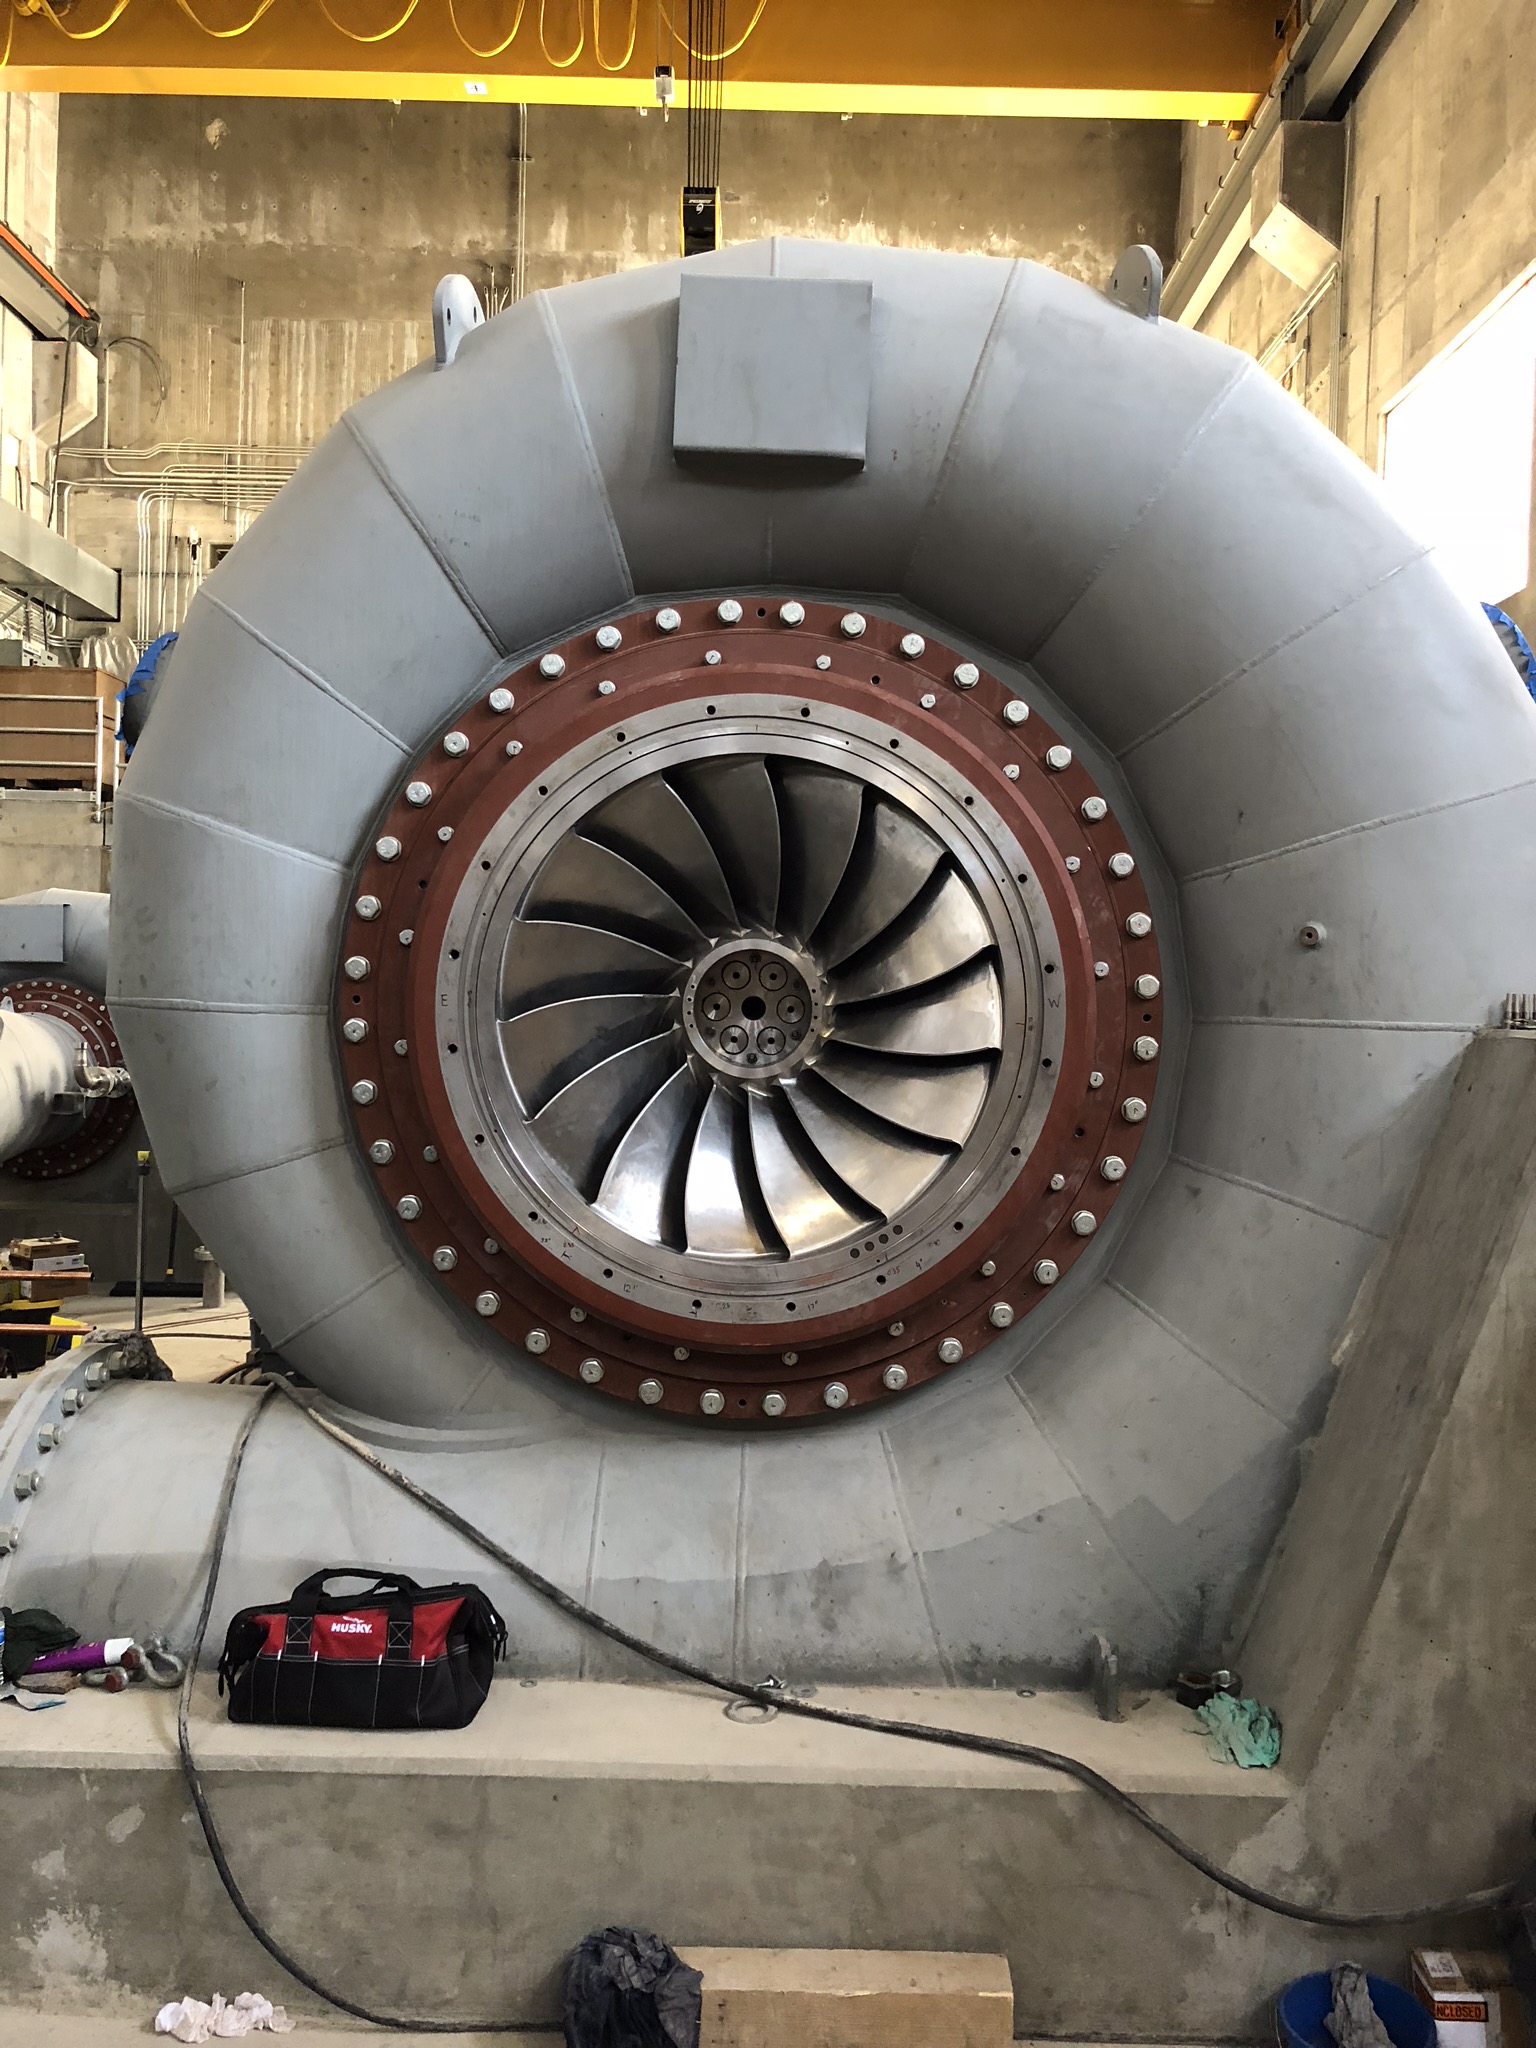 New turbine placed in the new powerhouse